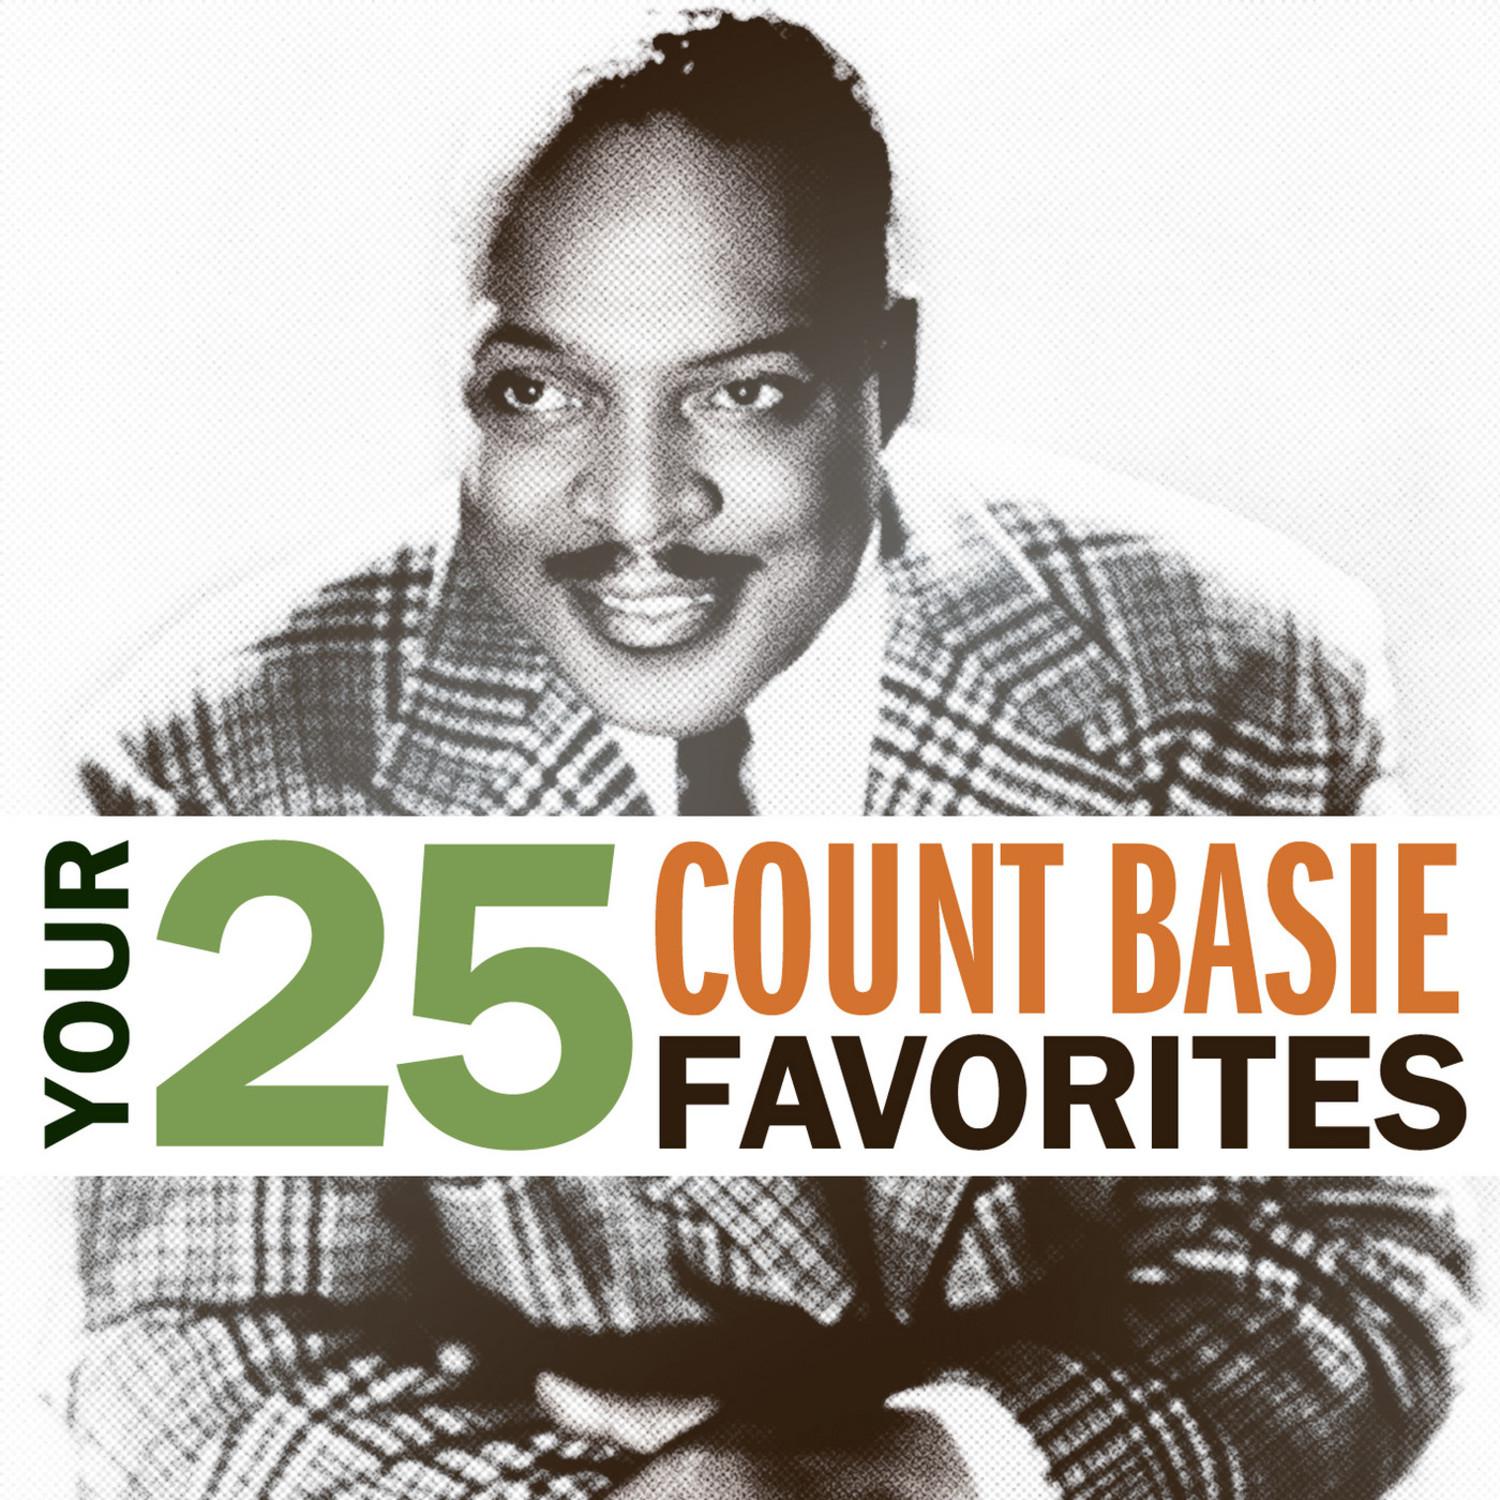 Your 25 Count Basie Favorites